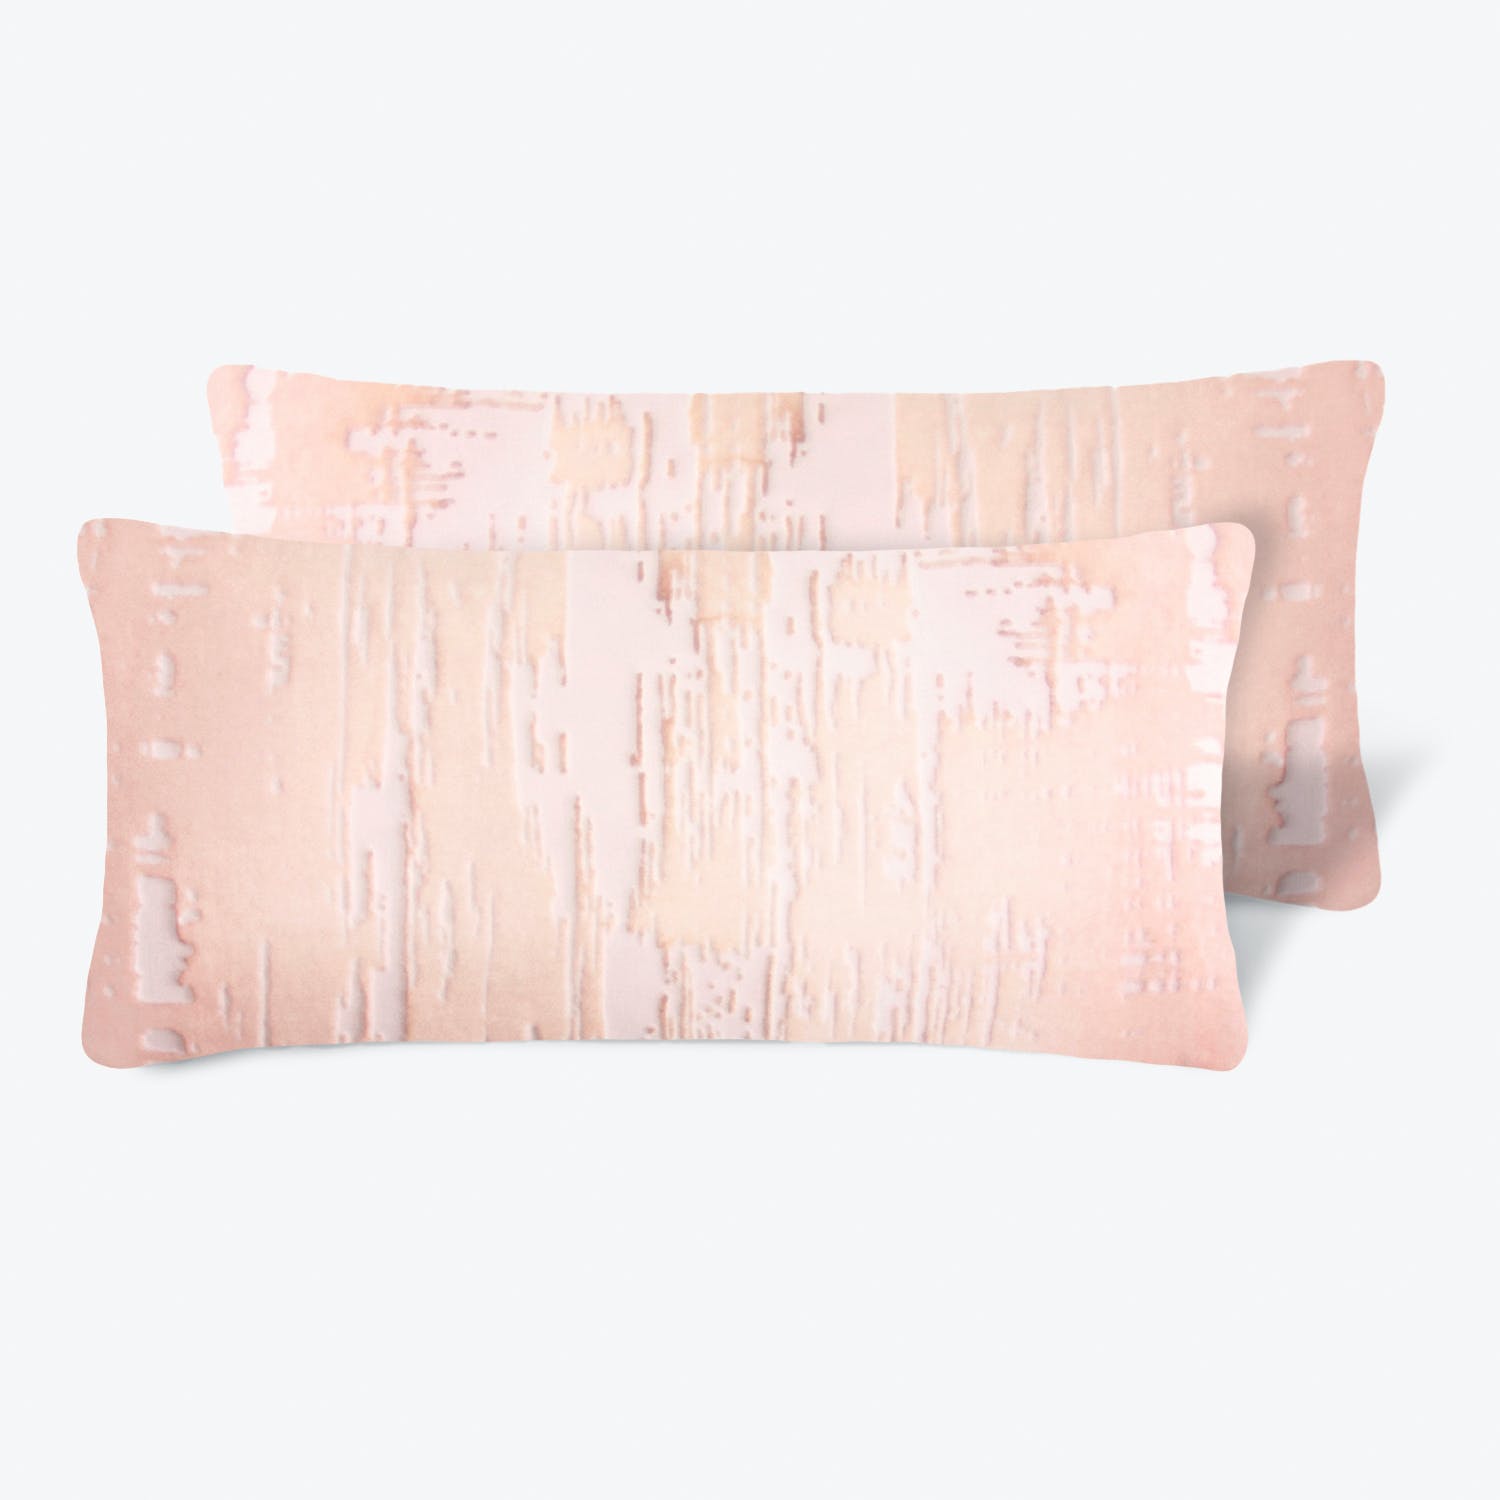 Textured blush pink throw pillows with rustic distressed pattern.